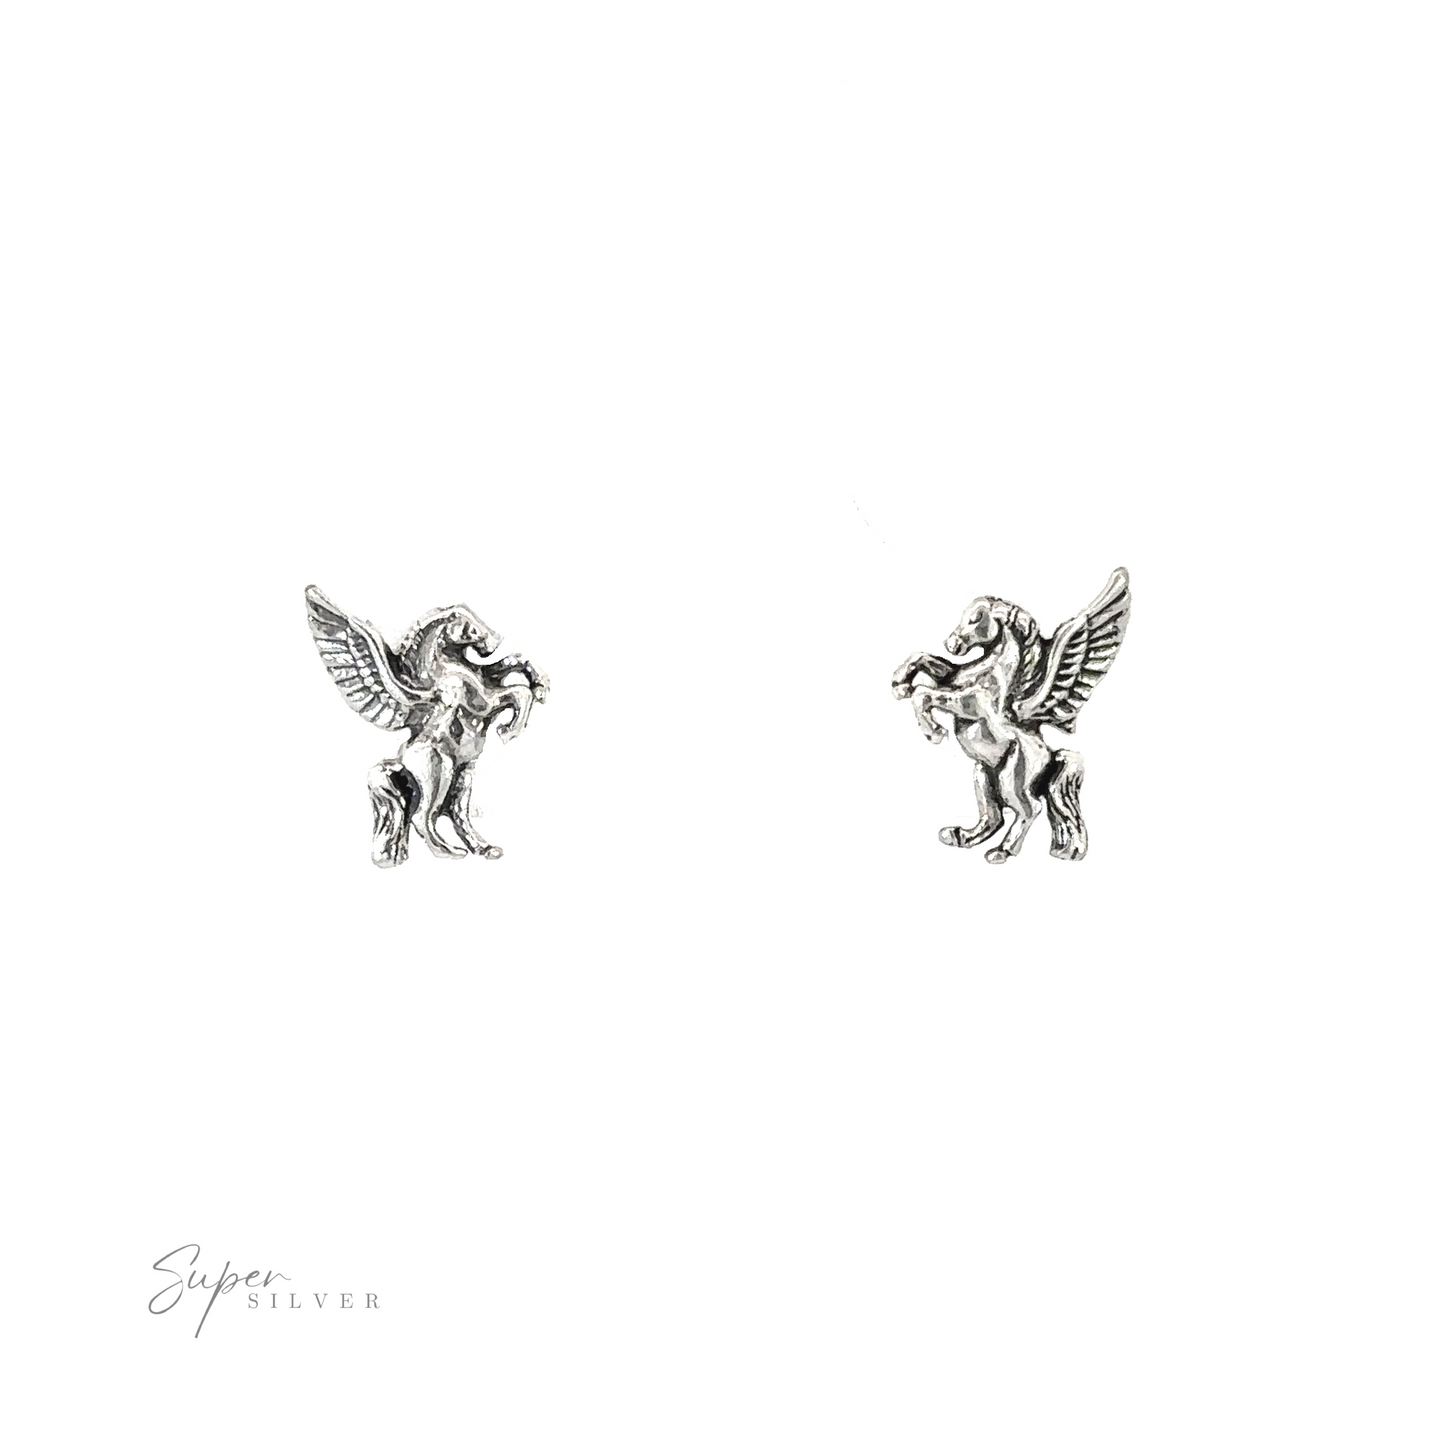 These sterling silver Pegasus studs feature angelic pegasus studs.